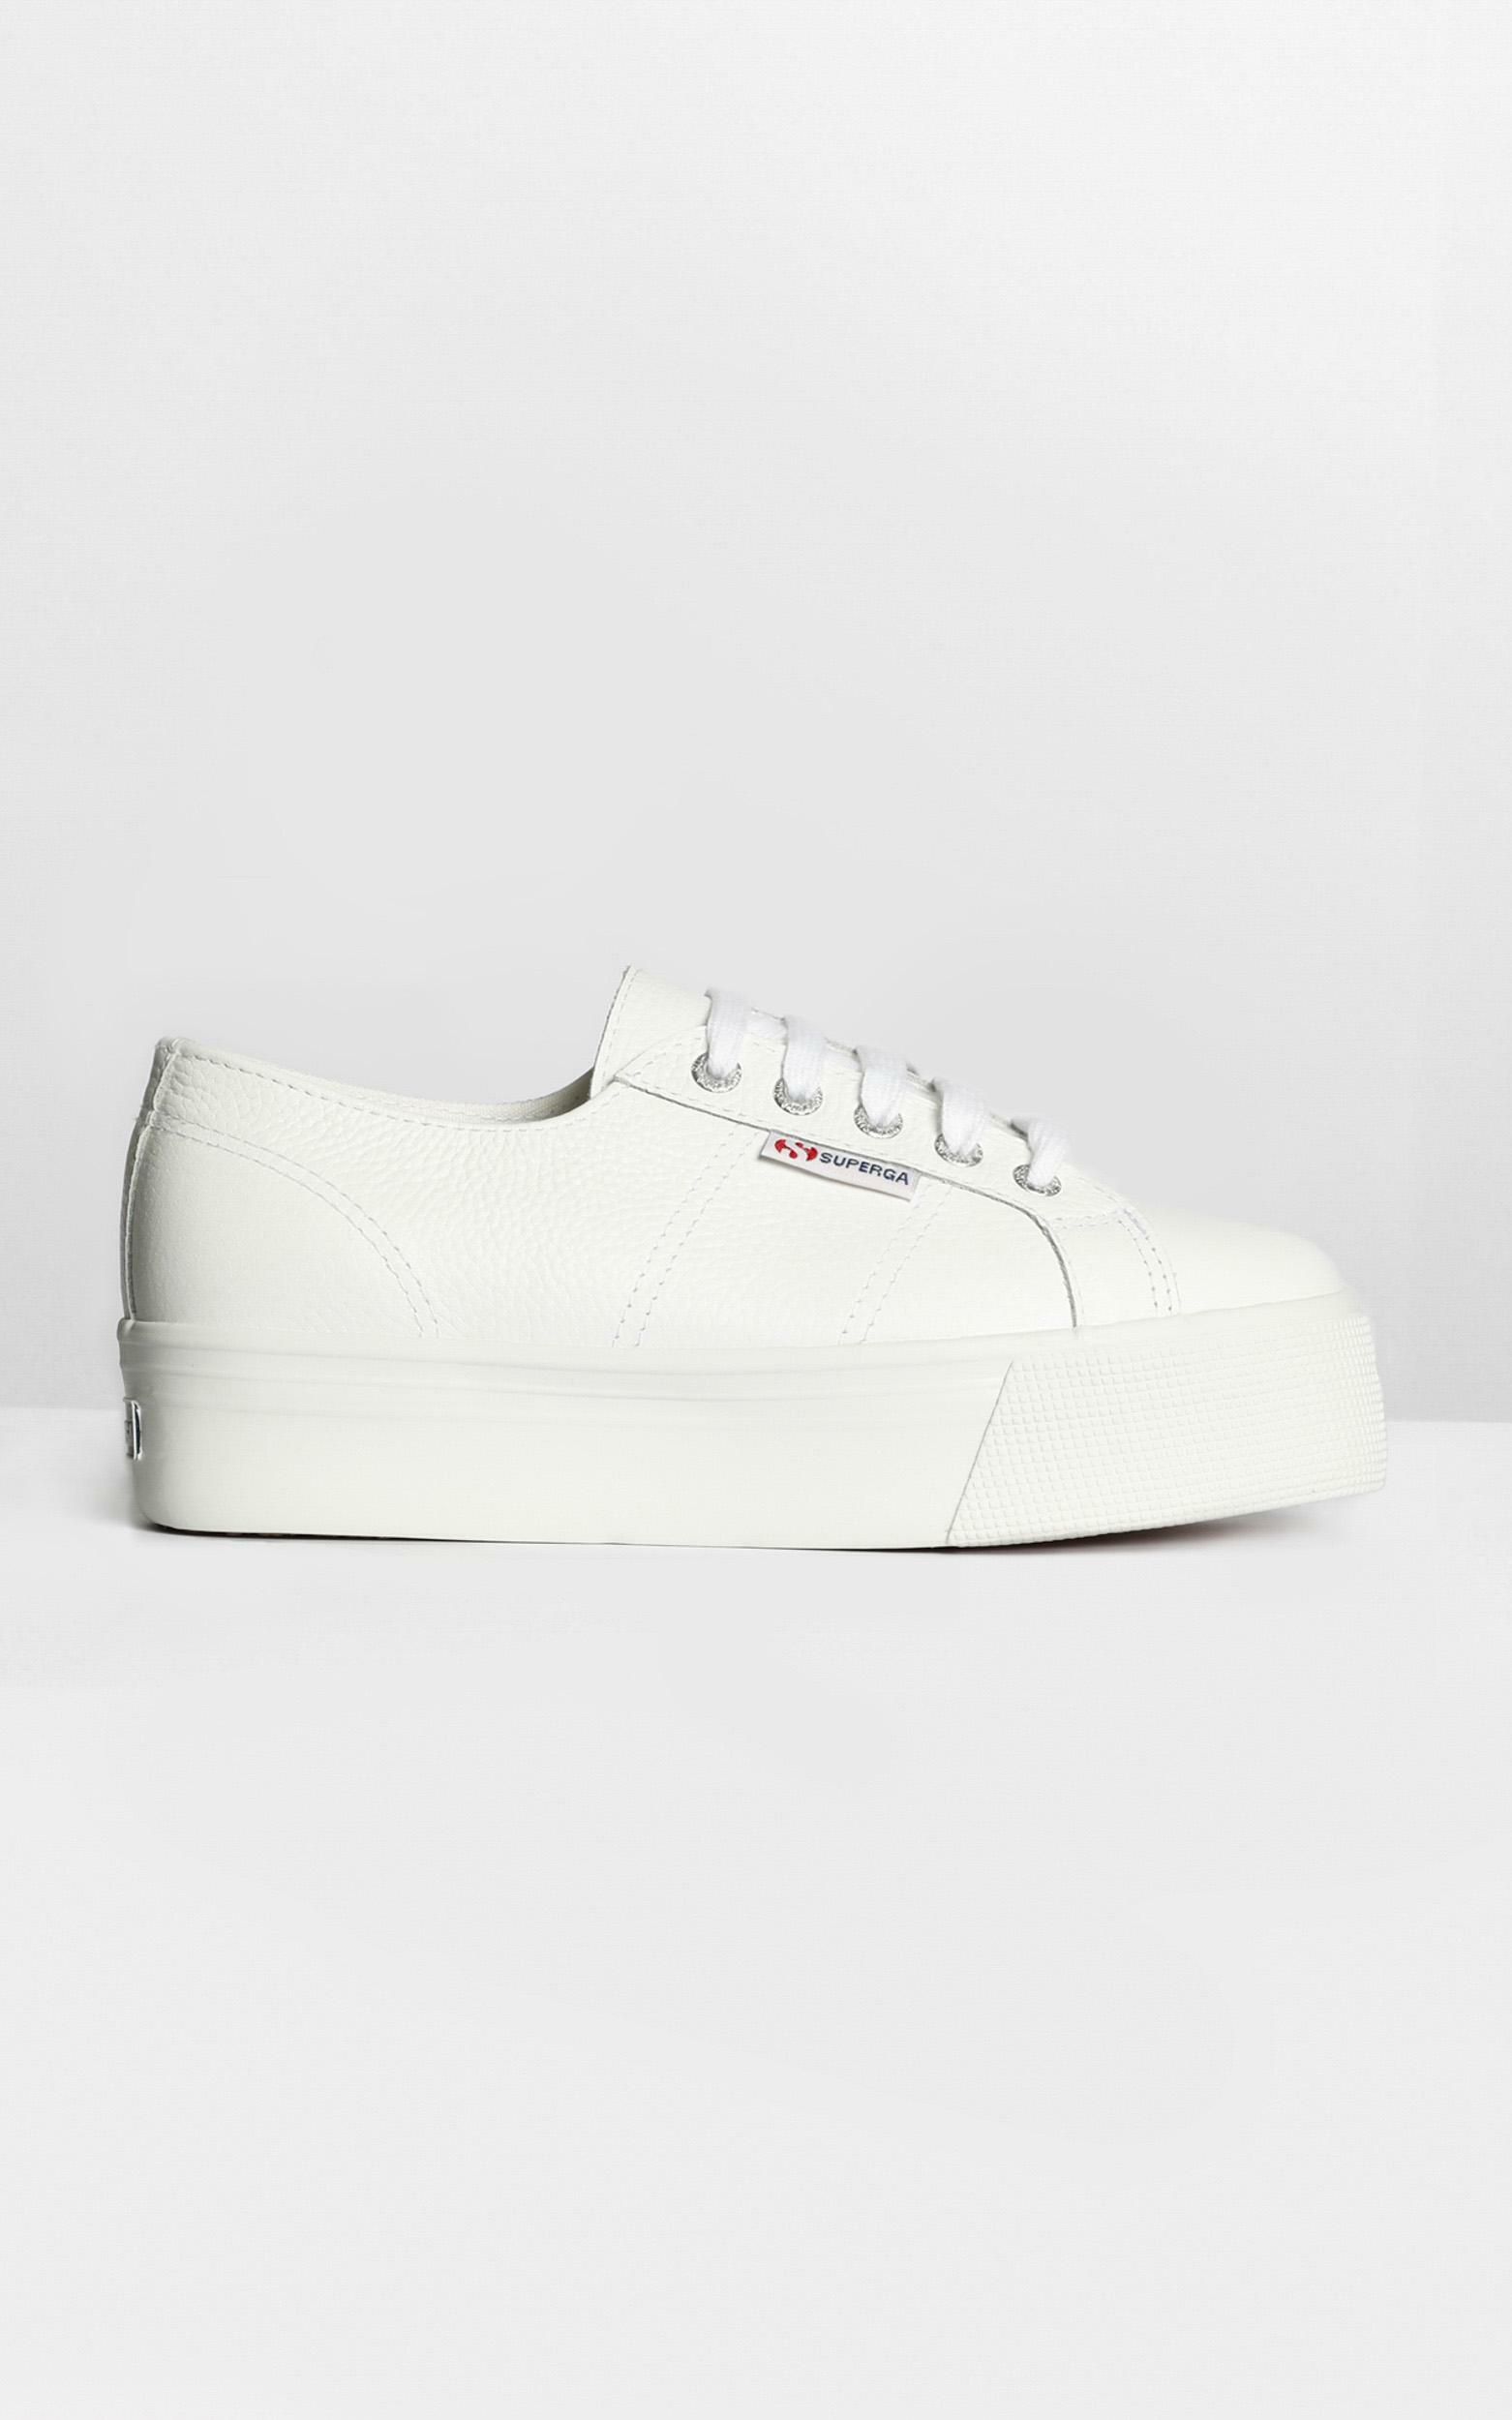 platform leather white sneakers